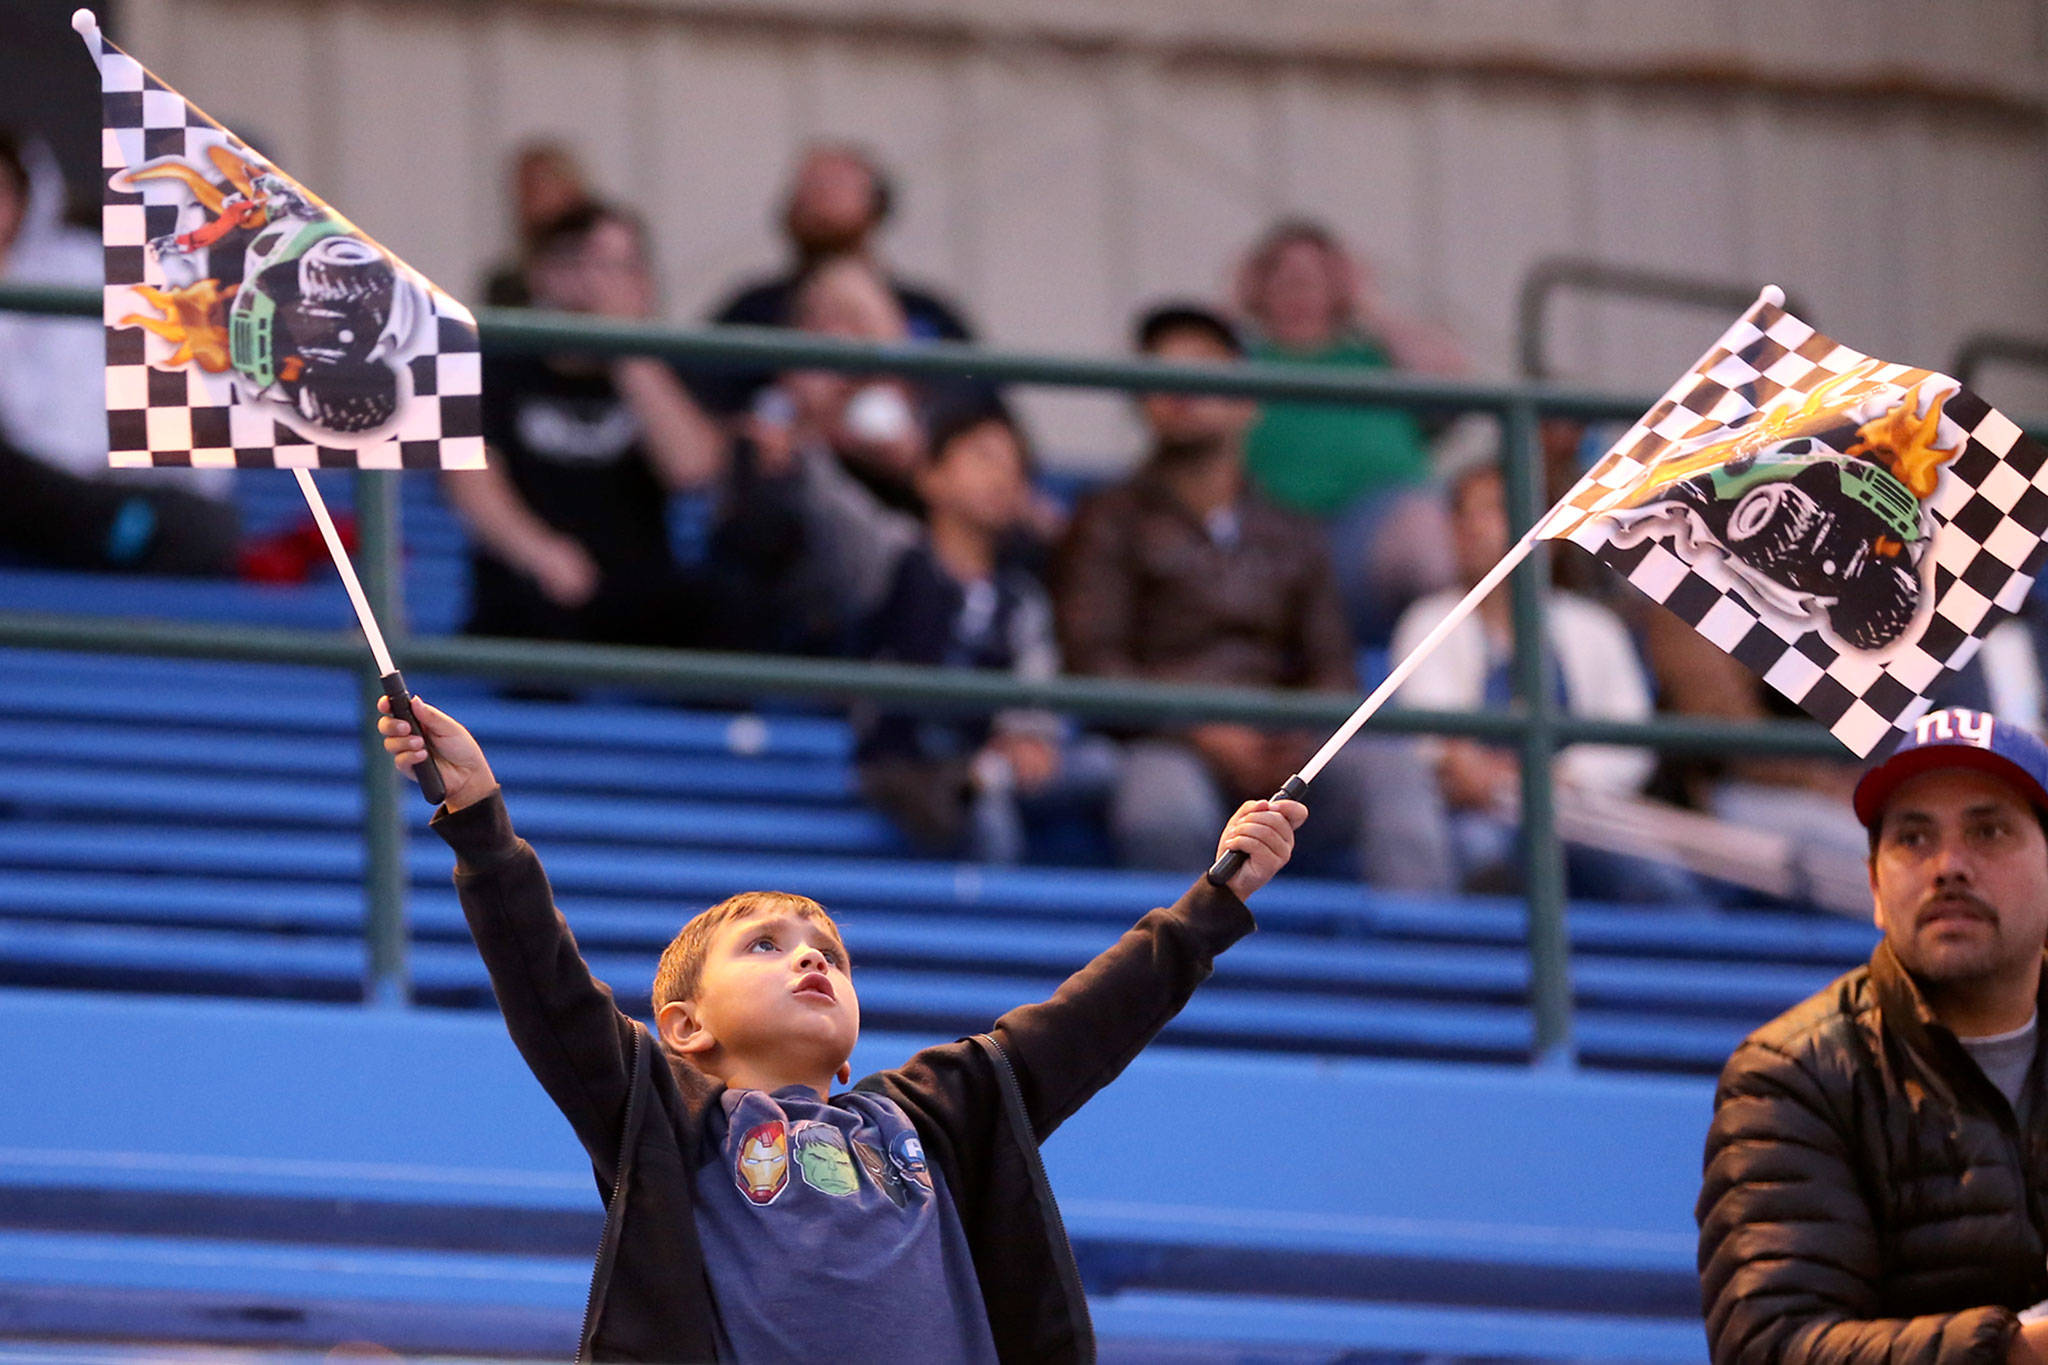 A fan is enraptured by his flags during the monster truck show Friday evening during Evergreen State Fair at the Evergreen Speedway in Monroe. (Kevin Clark / The Herald)